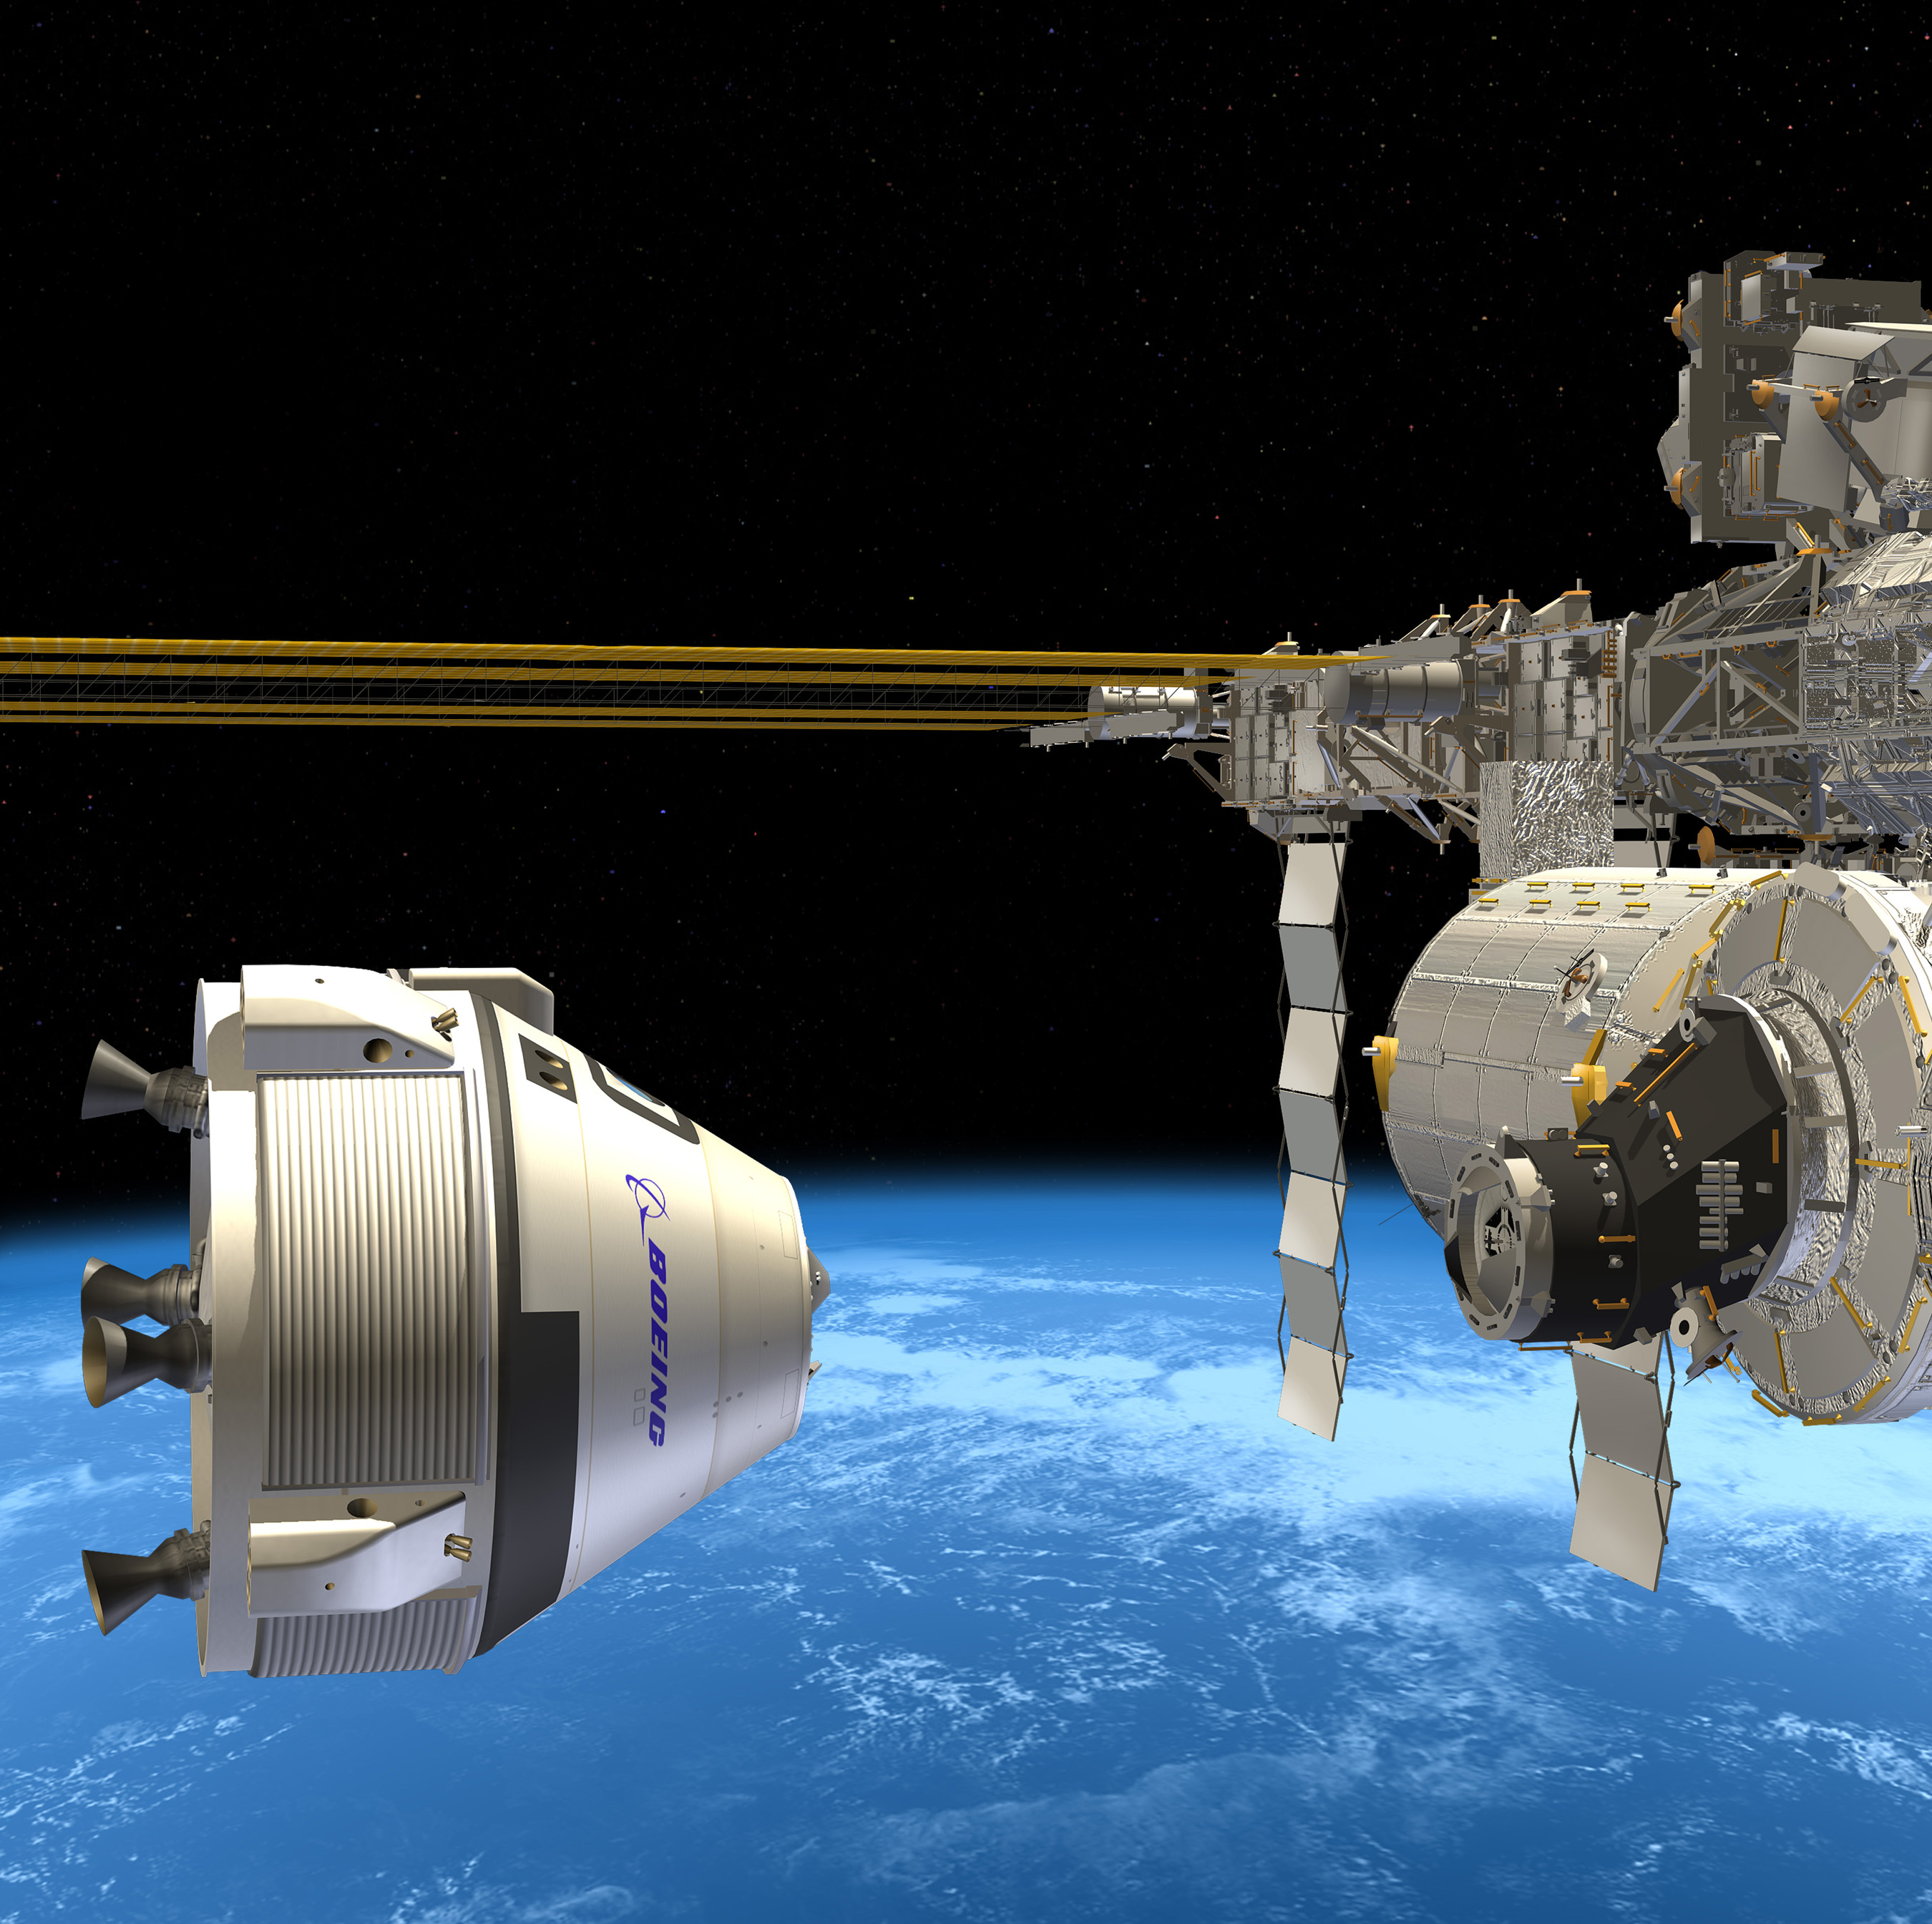 Enroute to the space station, the CST-100 will be capable of long stays in orbit. Image: Boeing